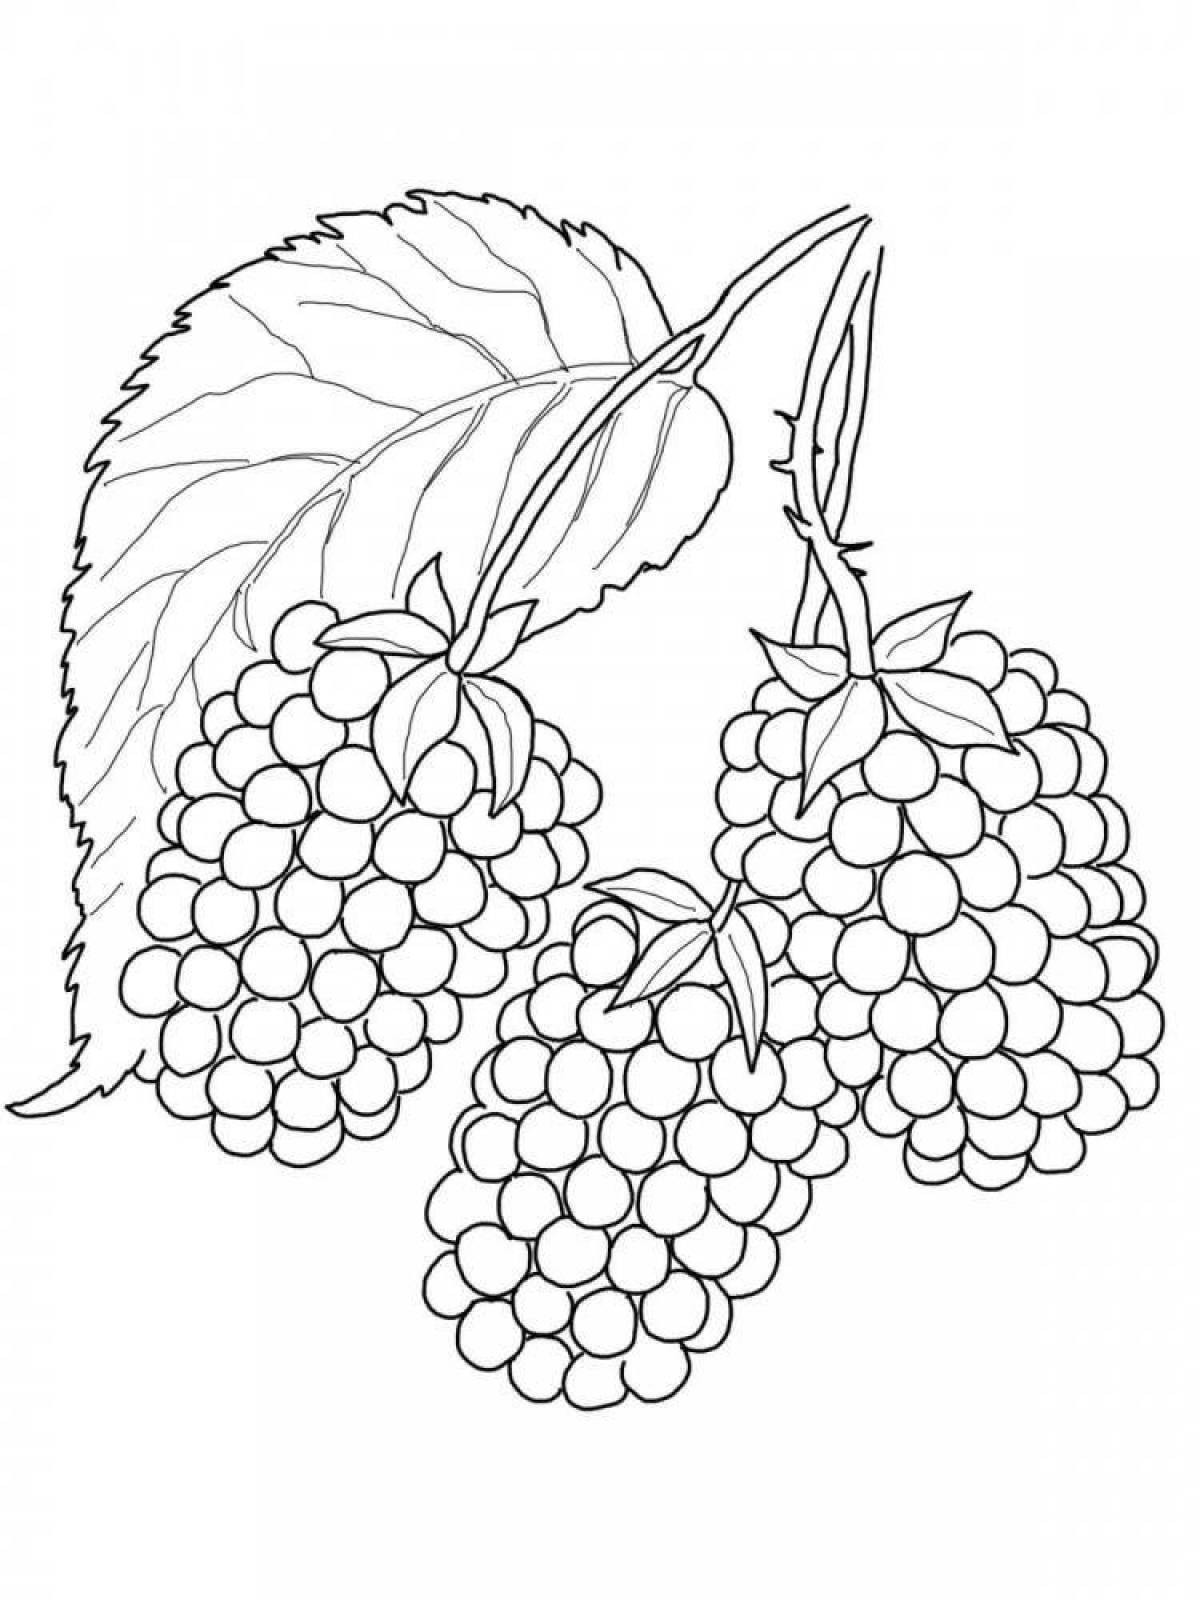 Bright raspberry coloring book for kids